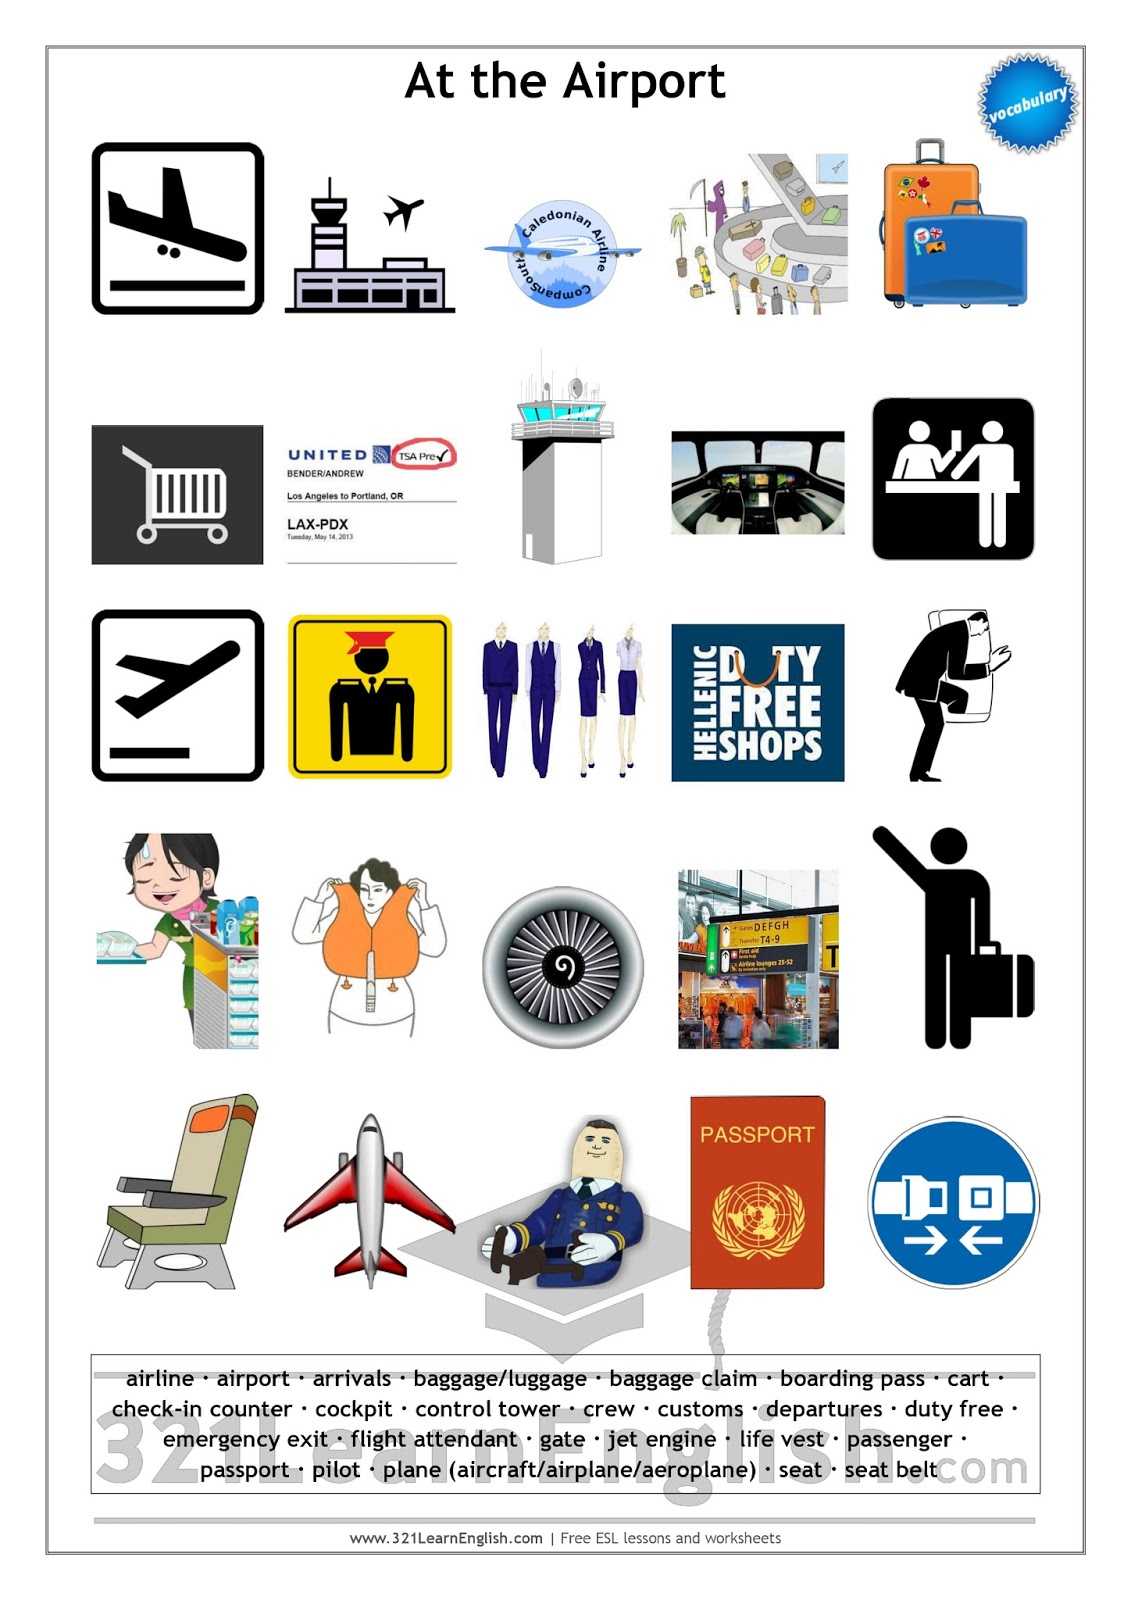 Free English Worksheets and 321 Learn English Vocabulary at the Airport Level B1